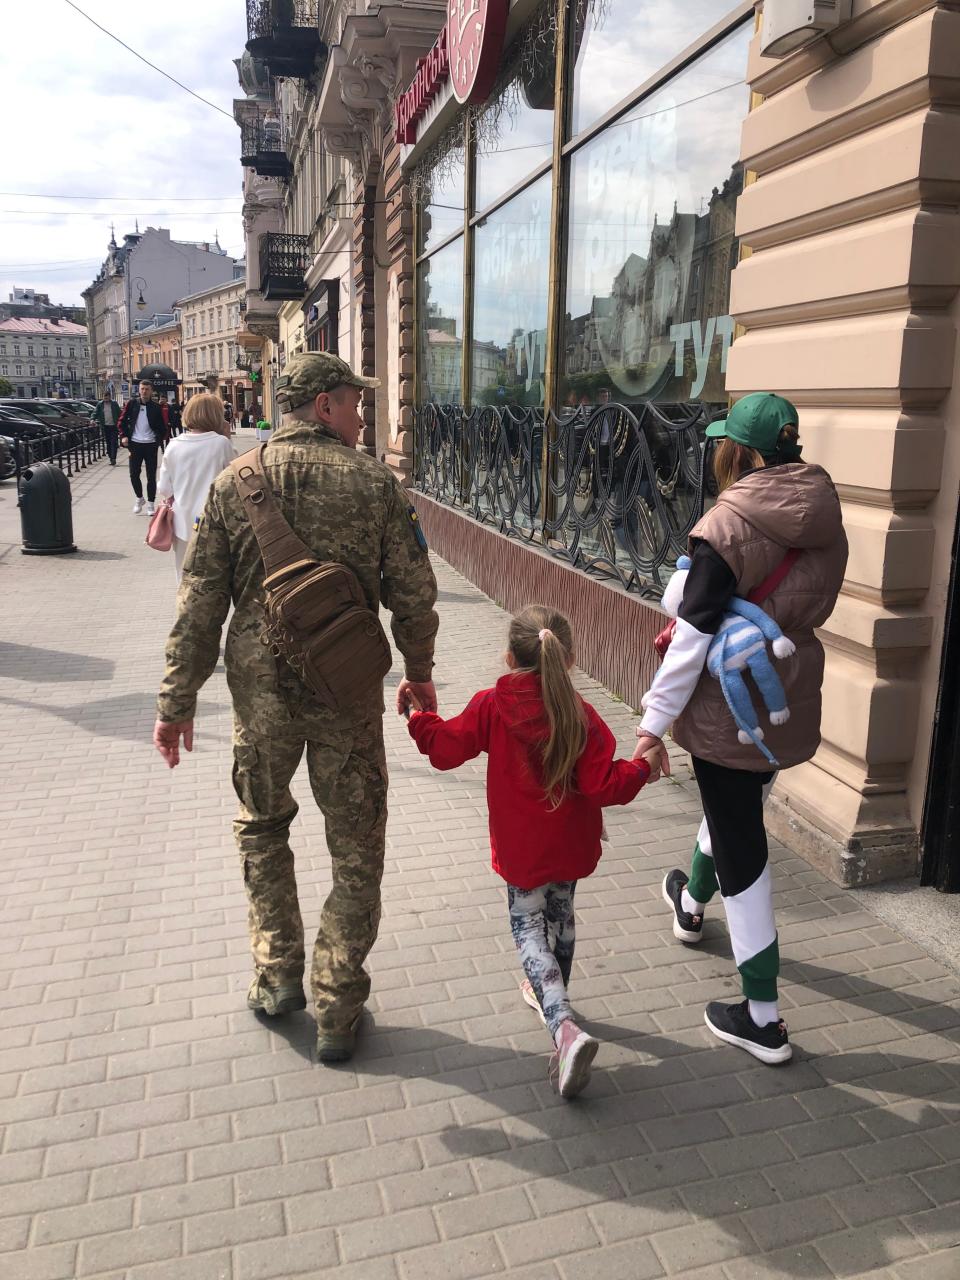 A Ukranian soldier walks with his wife and daughter in Lviv, Ukraine in May 2023. Jim Gamache, of Miromar Lakes, Florida, has offered aid in Ukraine twice since the way with Russia began in 2022. "This picture moves me every time I look at it," he says. Martial law dictates that nen between 18 and 60 are required to stay and fight in the war.